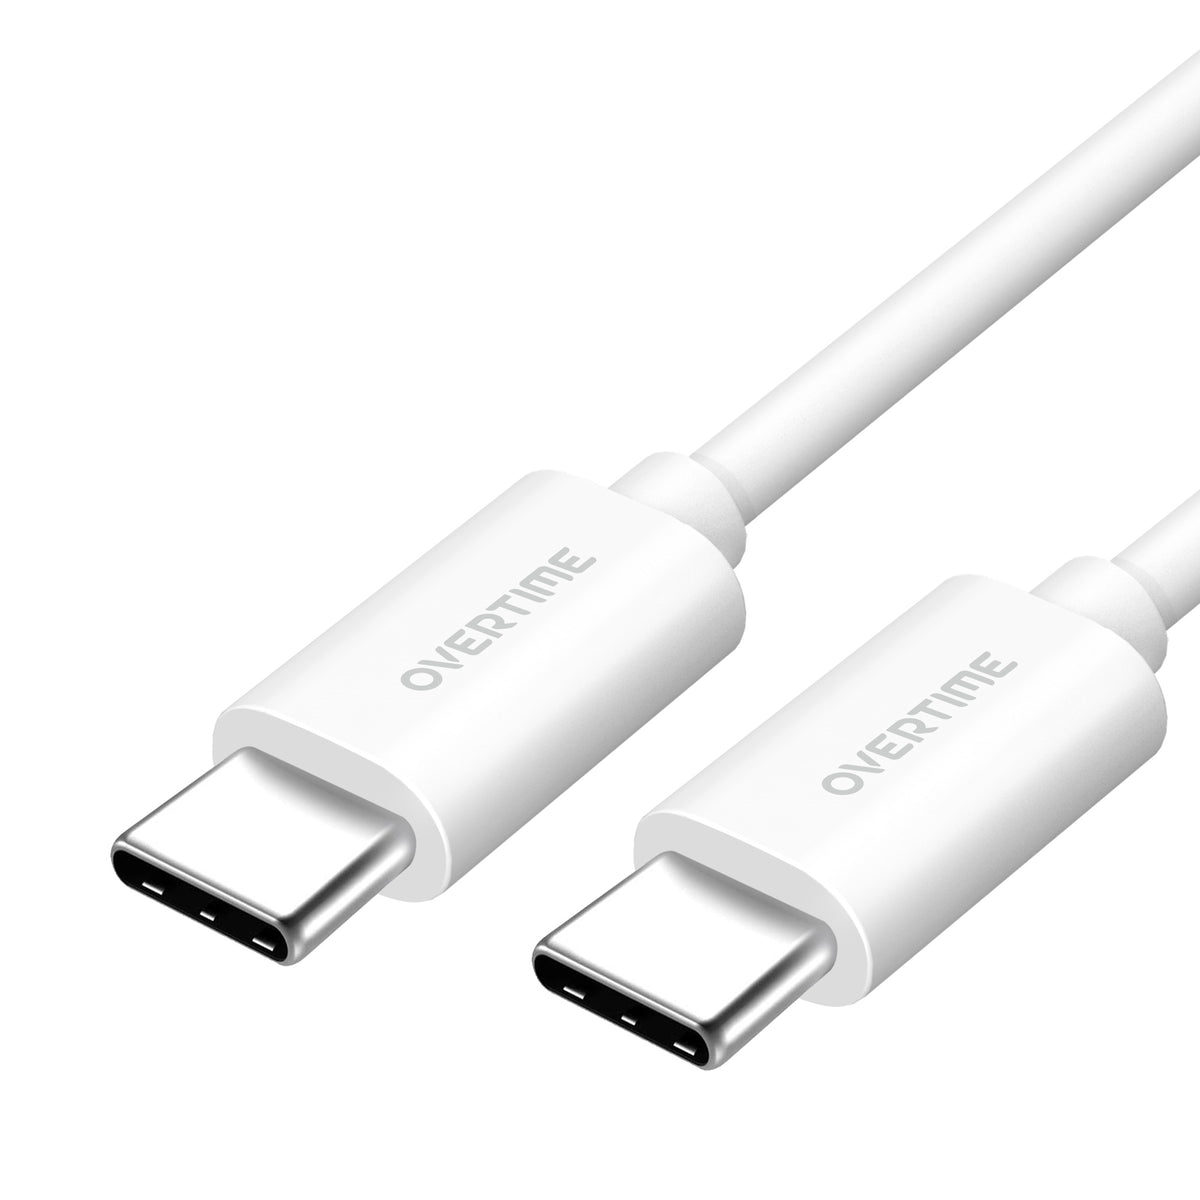 Overtime USB Type C Cable, 10ft USB C Charging Cord for iPad Pro and Android (2 Pack)